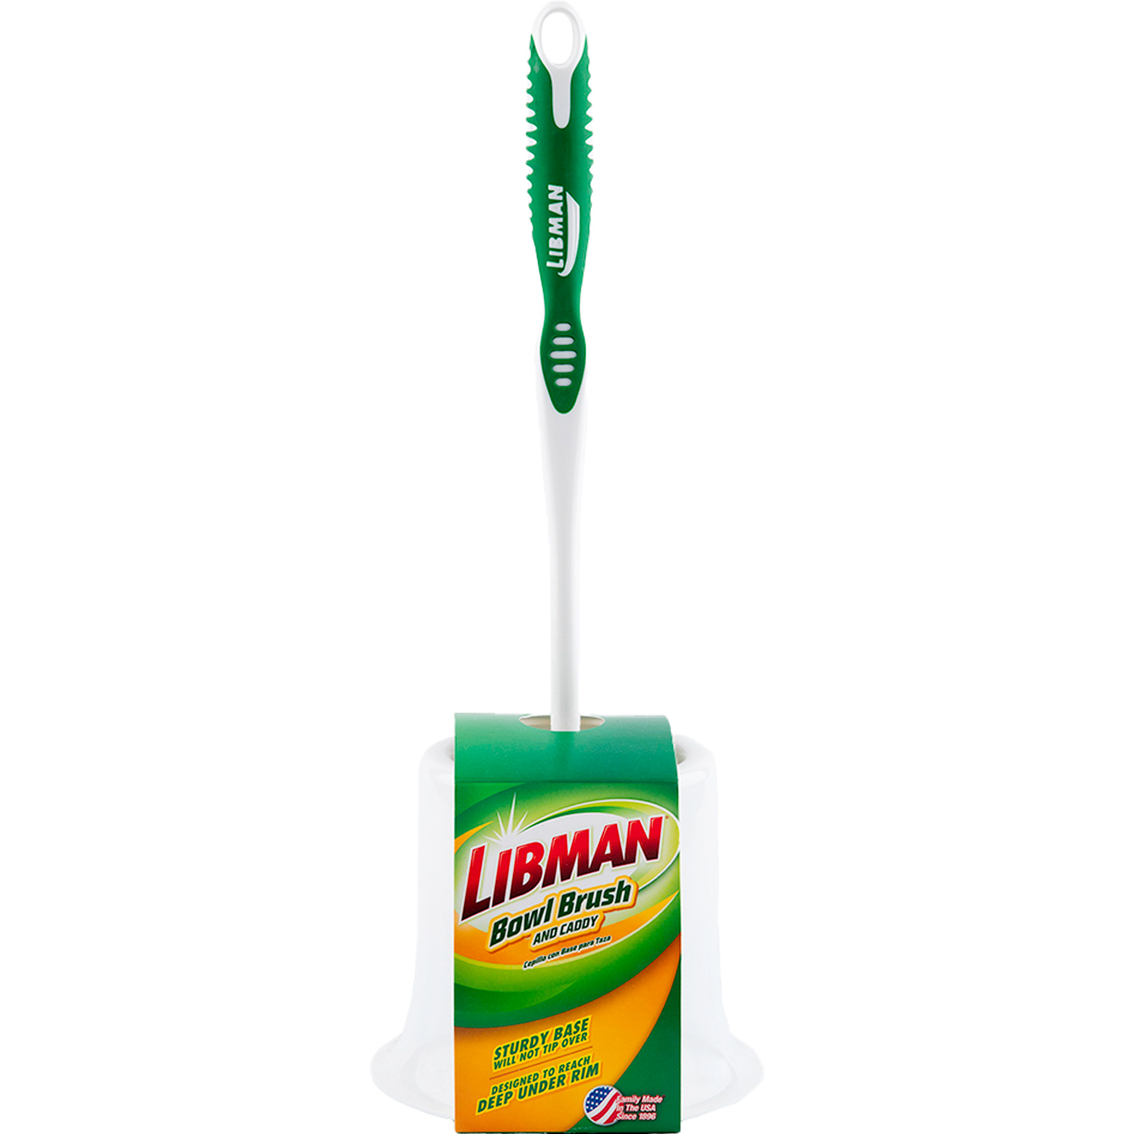 Libman Bowl Brush and Caddy 2 Pc. Set - Image 2 of 2